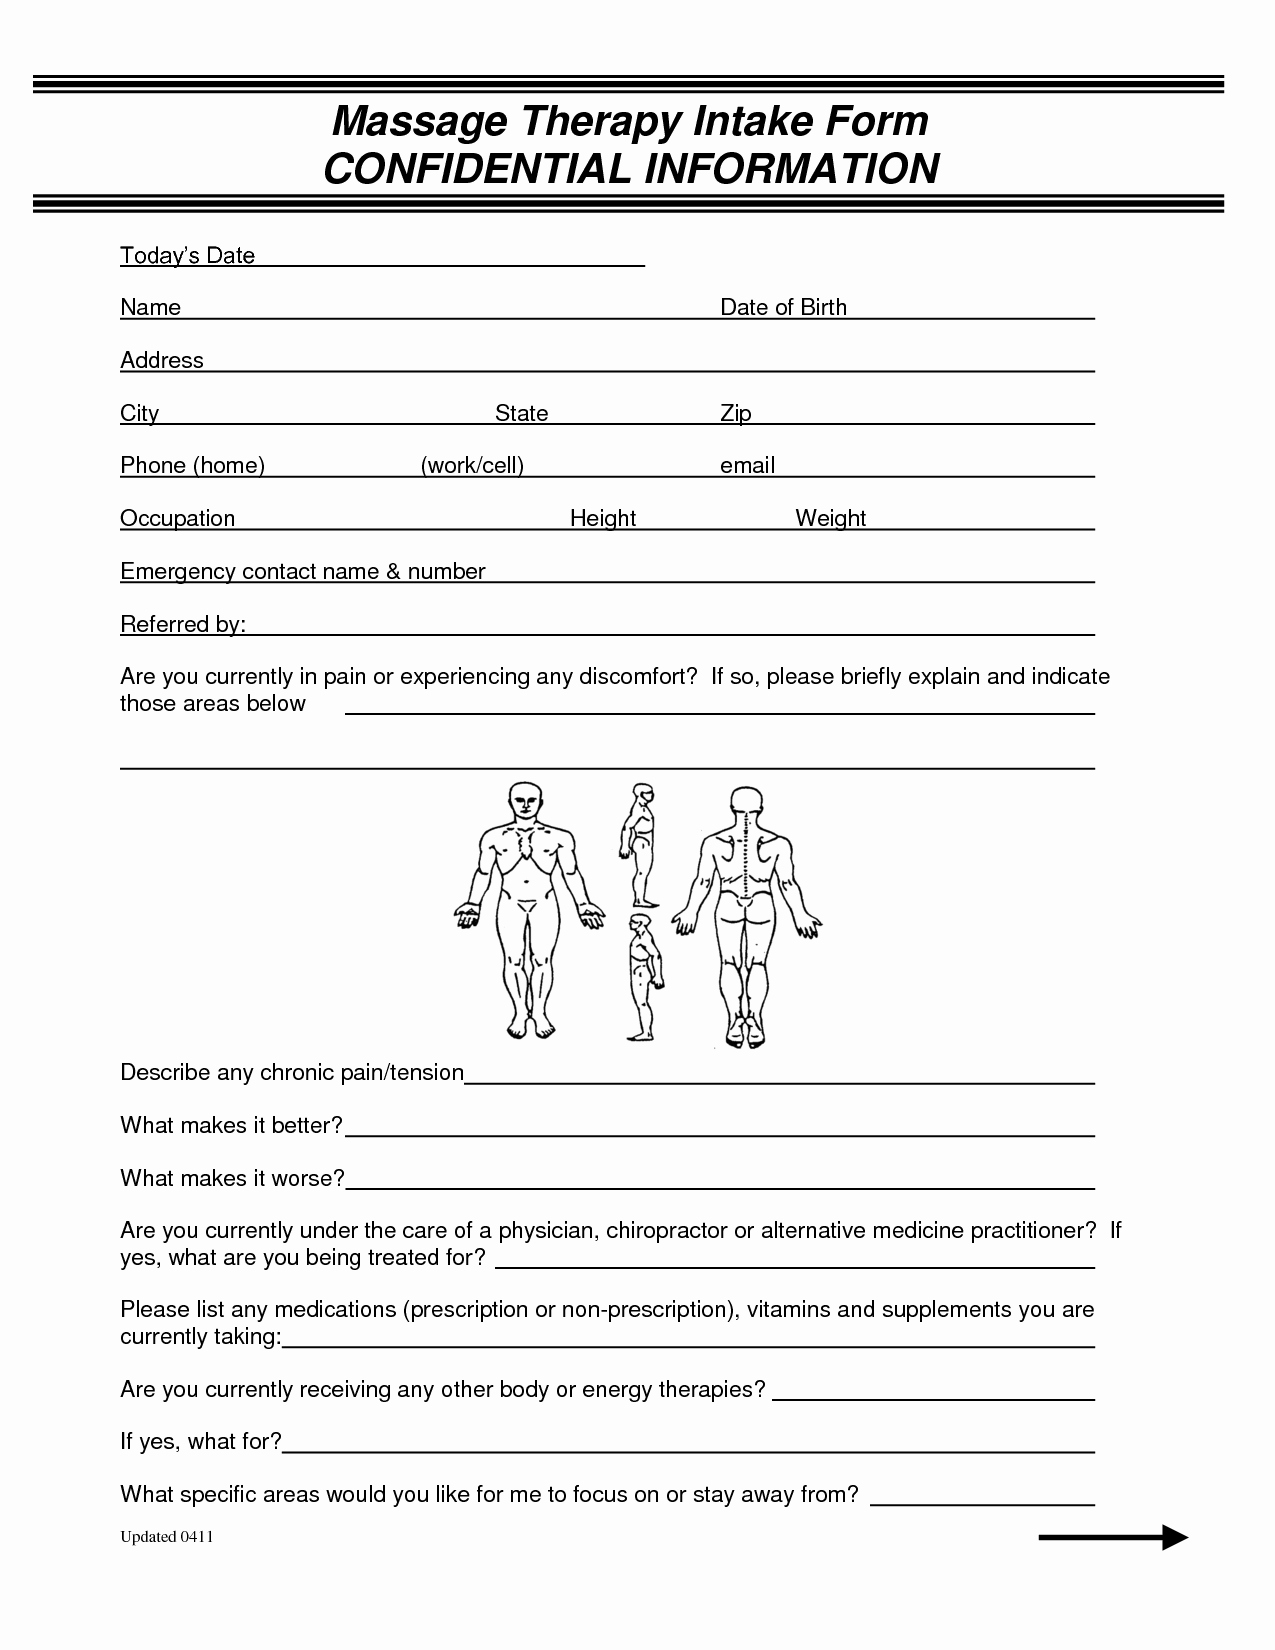 Chiropractic soap Notes Template Free Best Of soap Note Massage therapy Blank Google Search